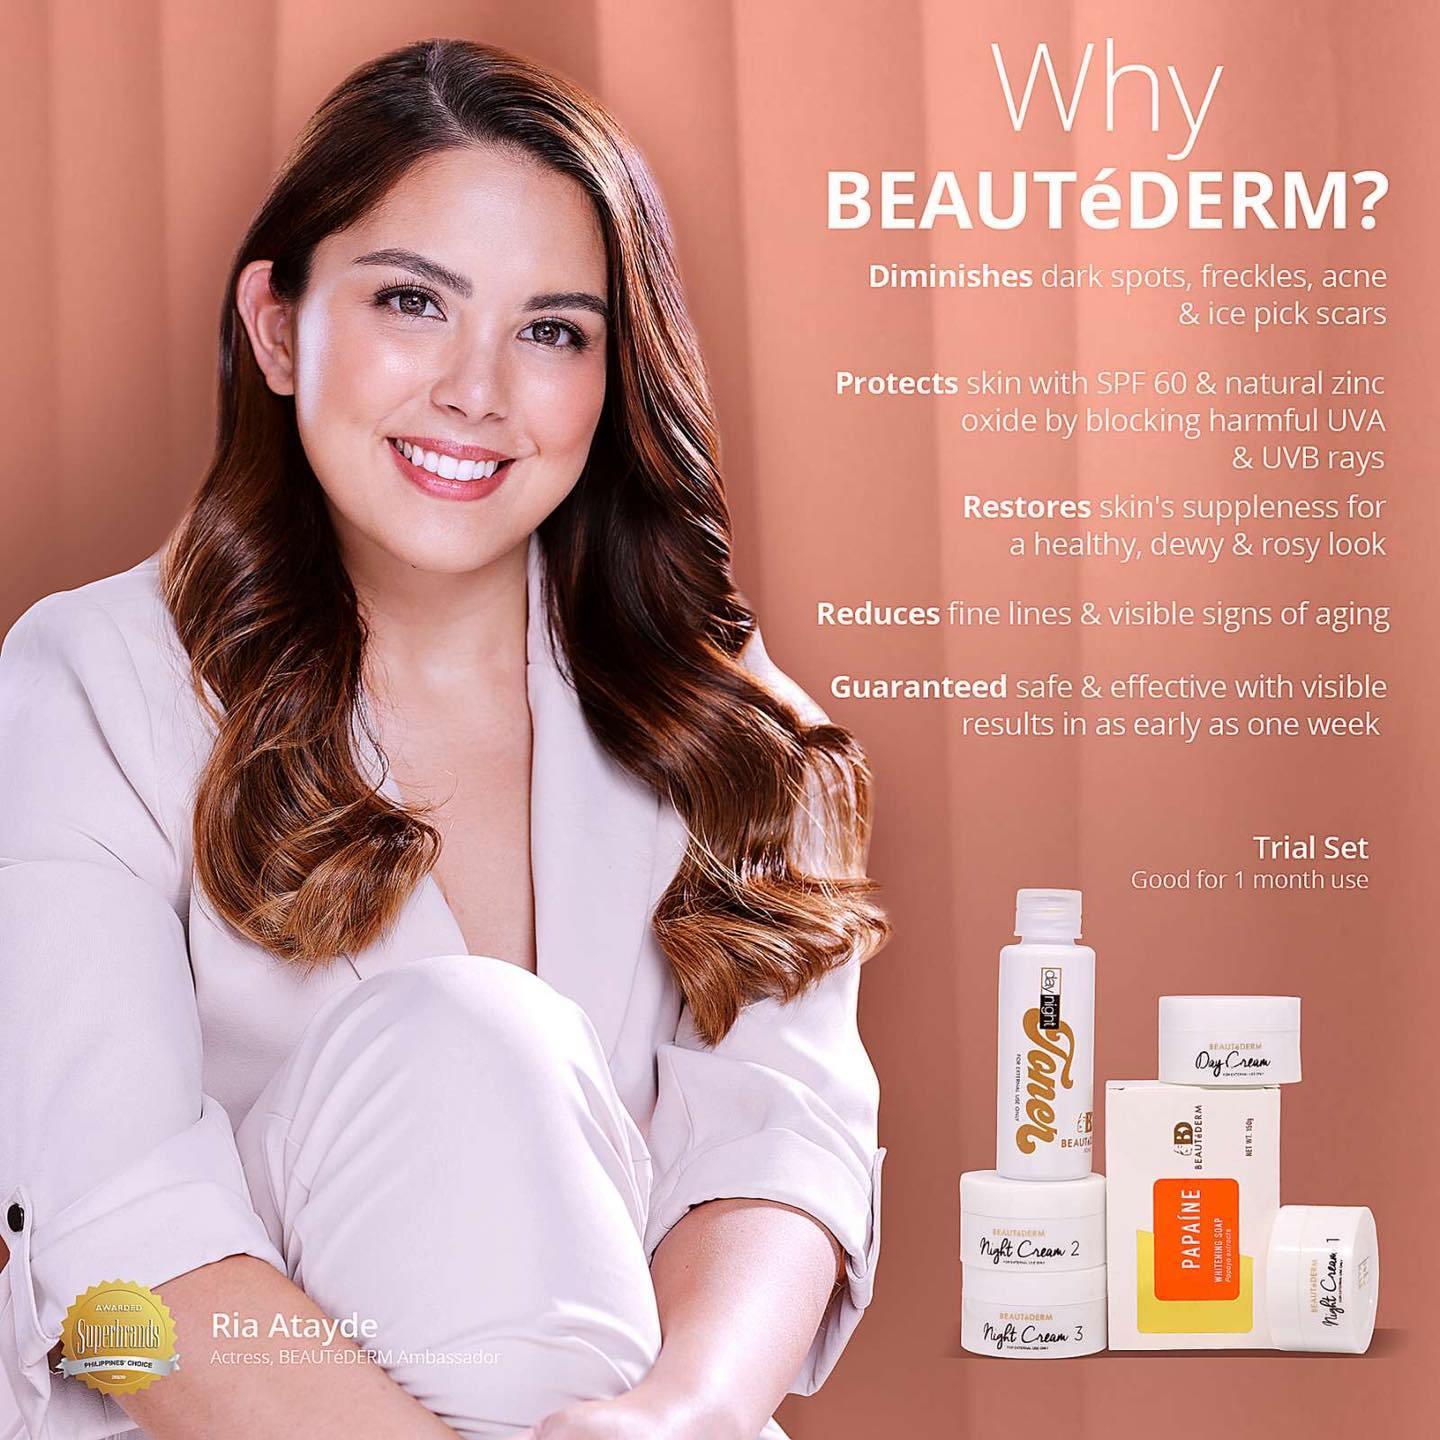 Beaute Trial Set, Good for 1-month use, with Ria Atayde (Beautederm Ambassador)